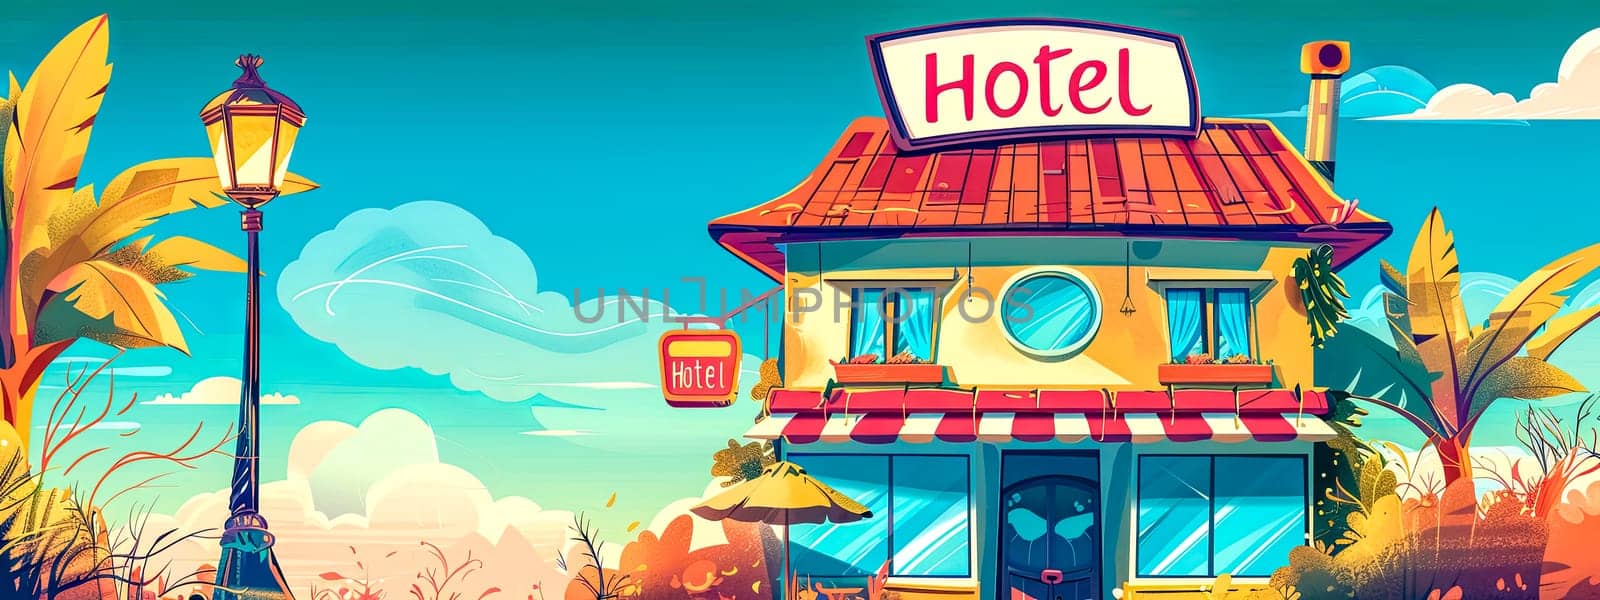 Vibrant illustrated hotel facade with tropical foliage and sunset sky in a cartoon style